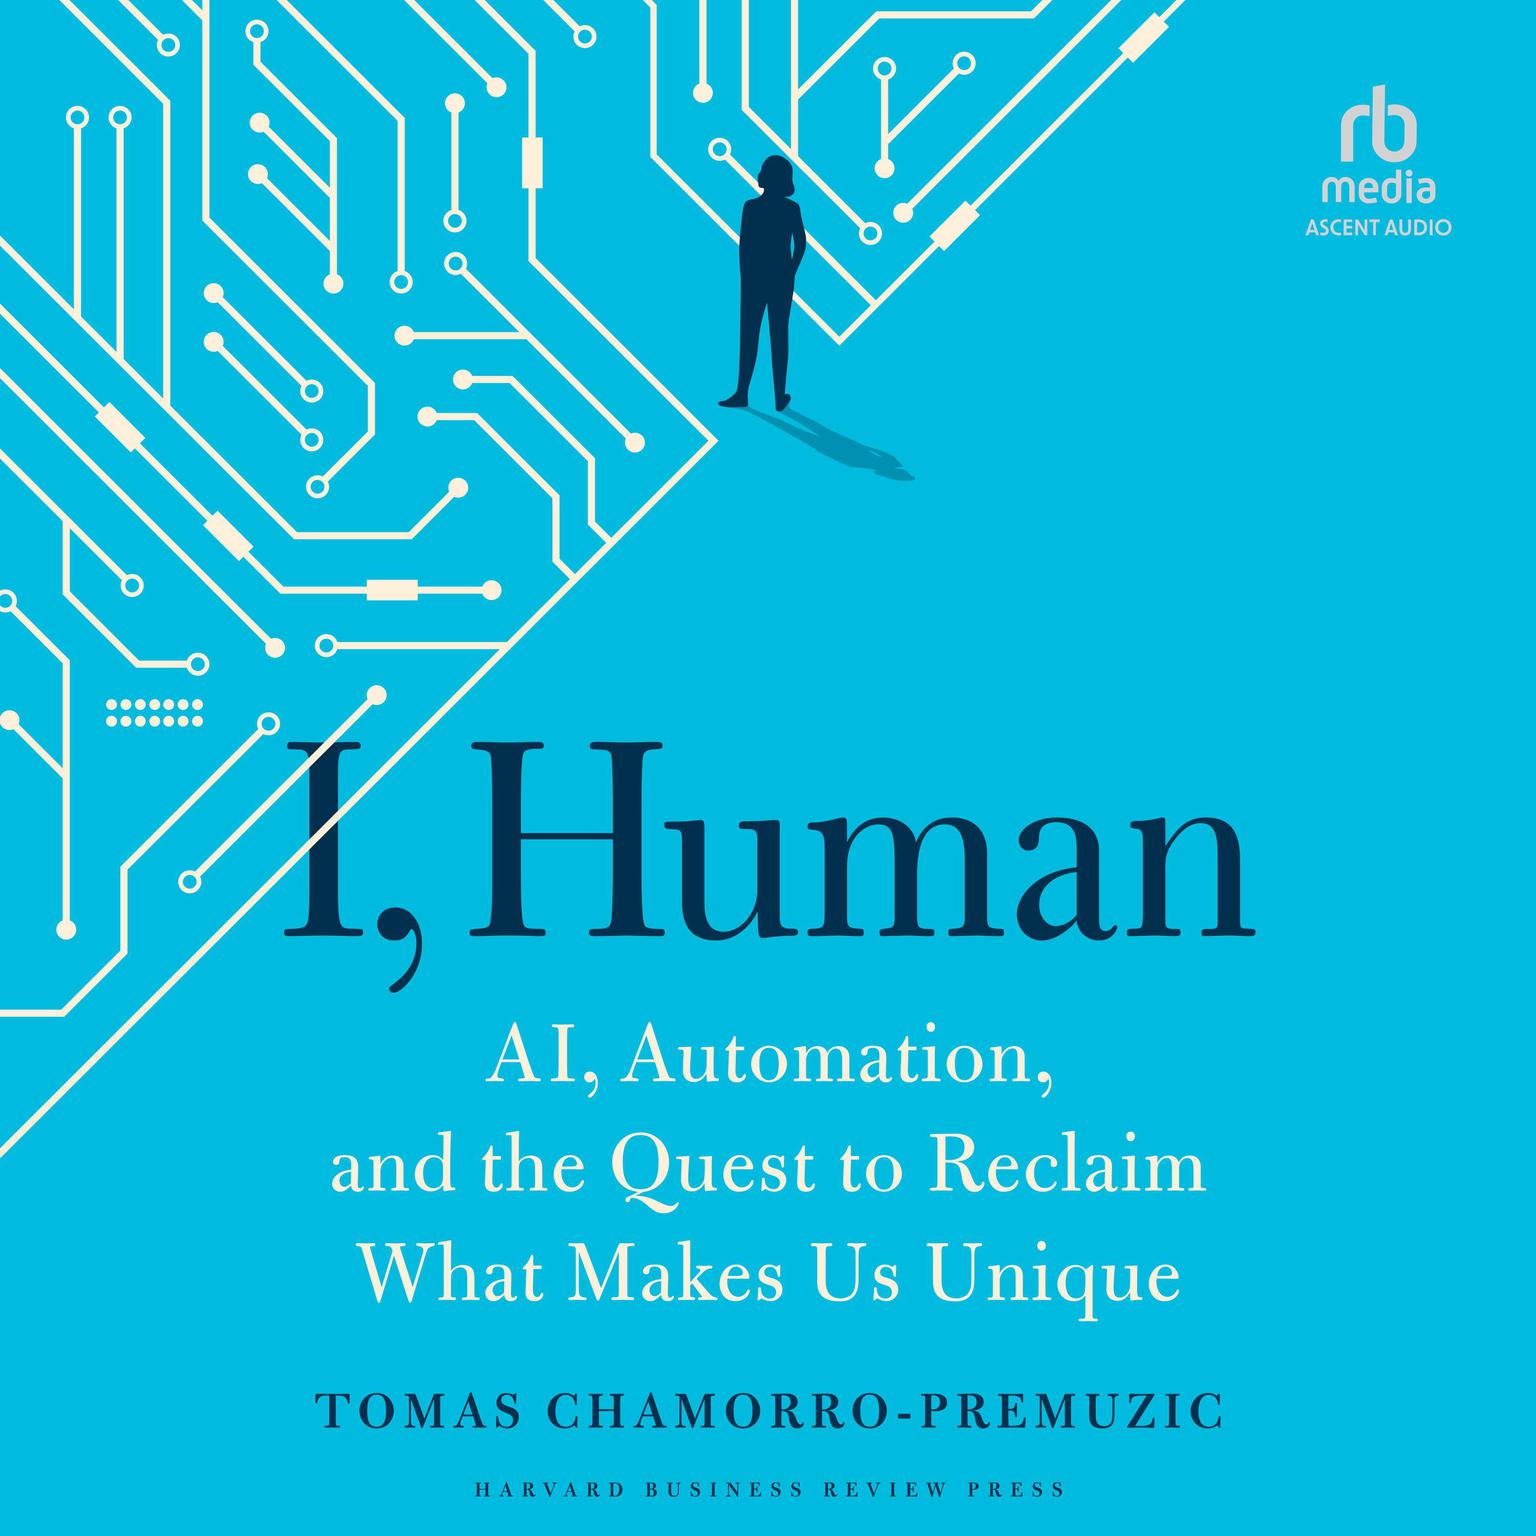 I, Human: AI, Automation, and the Quest to Reclaim What Makes Us Unique Audiobook, by Tomas Chamorro-Premuzic